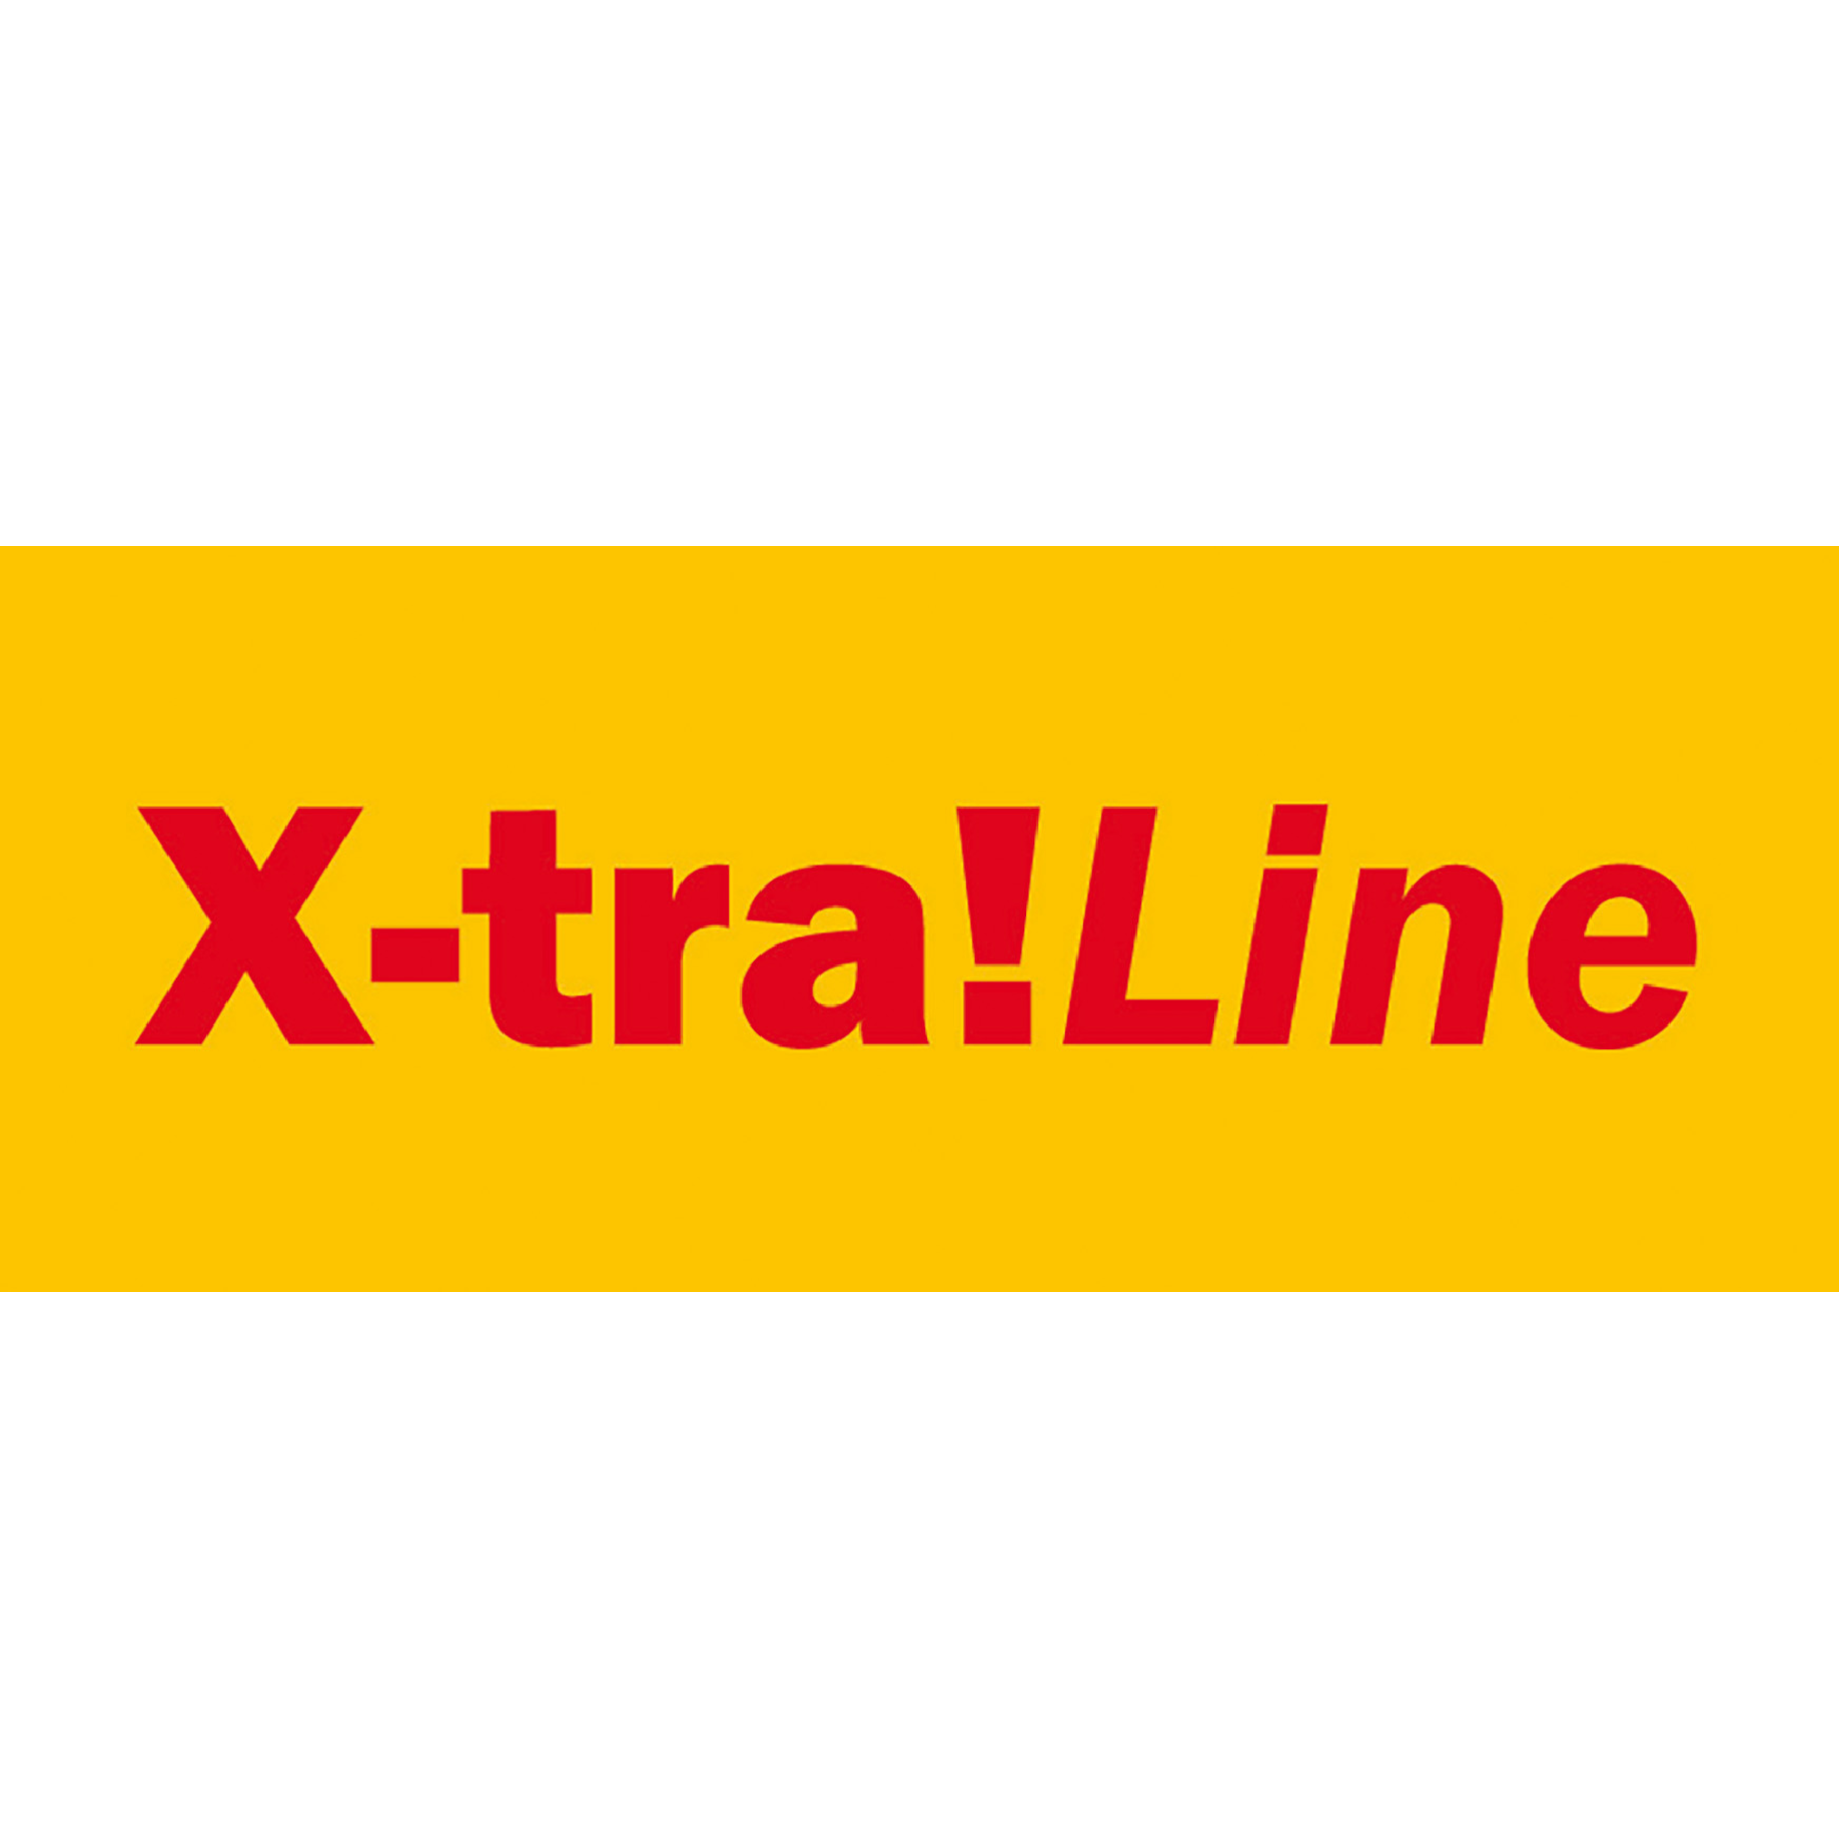 Whiteboard X-tra!Line Emaille, antimikrobiell